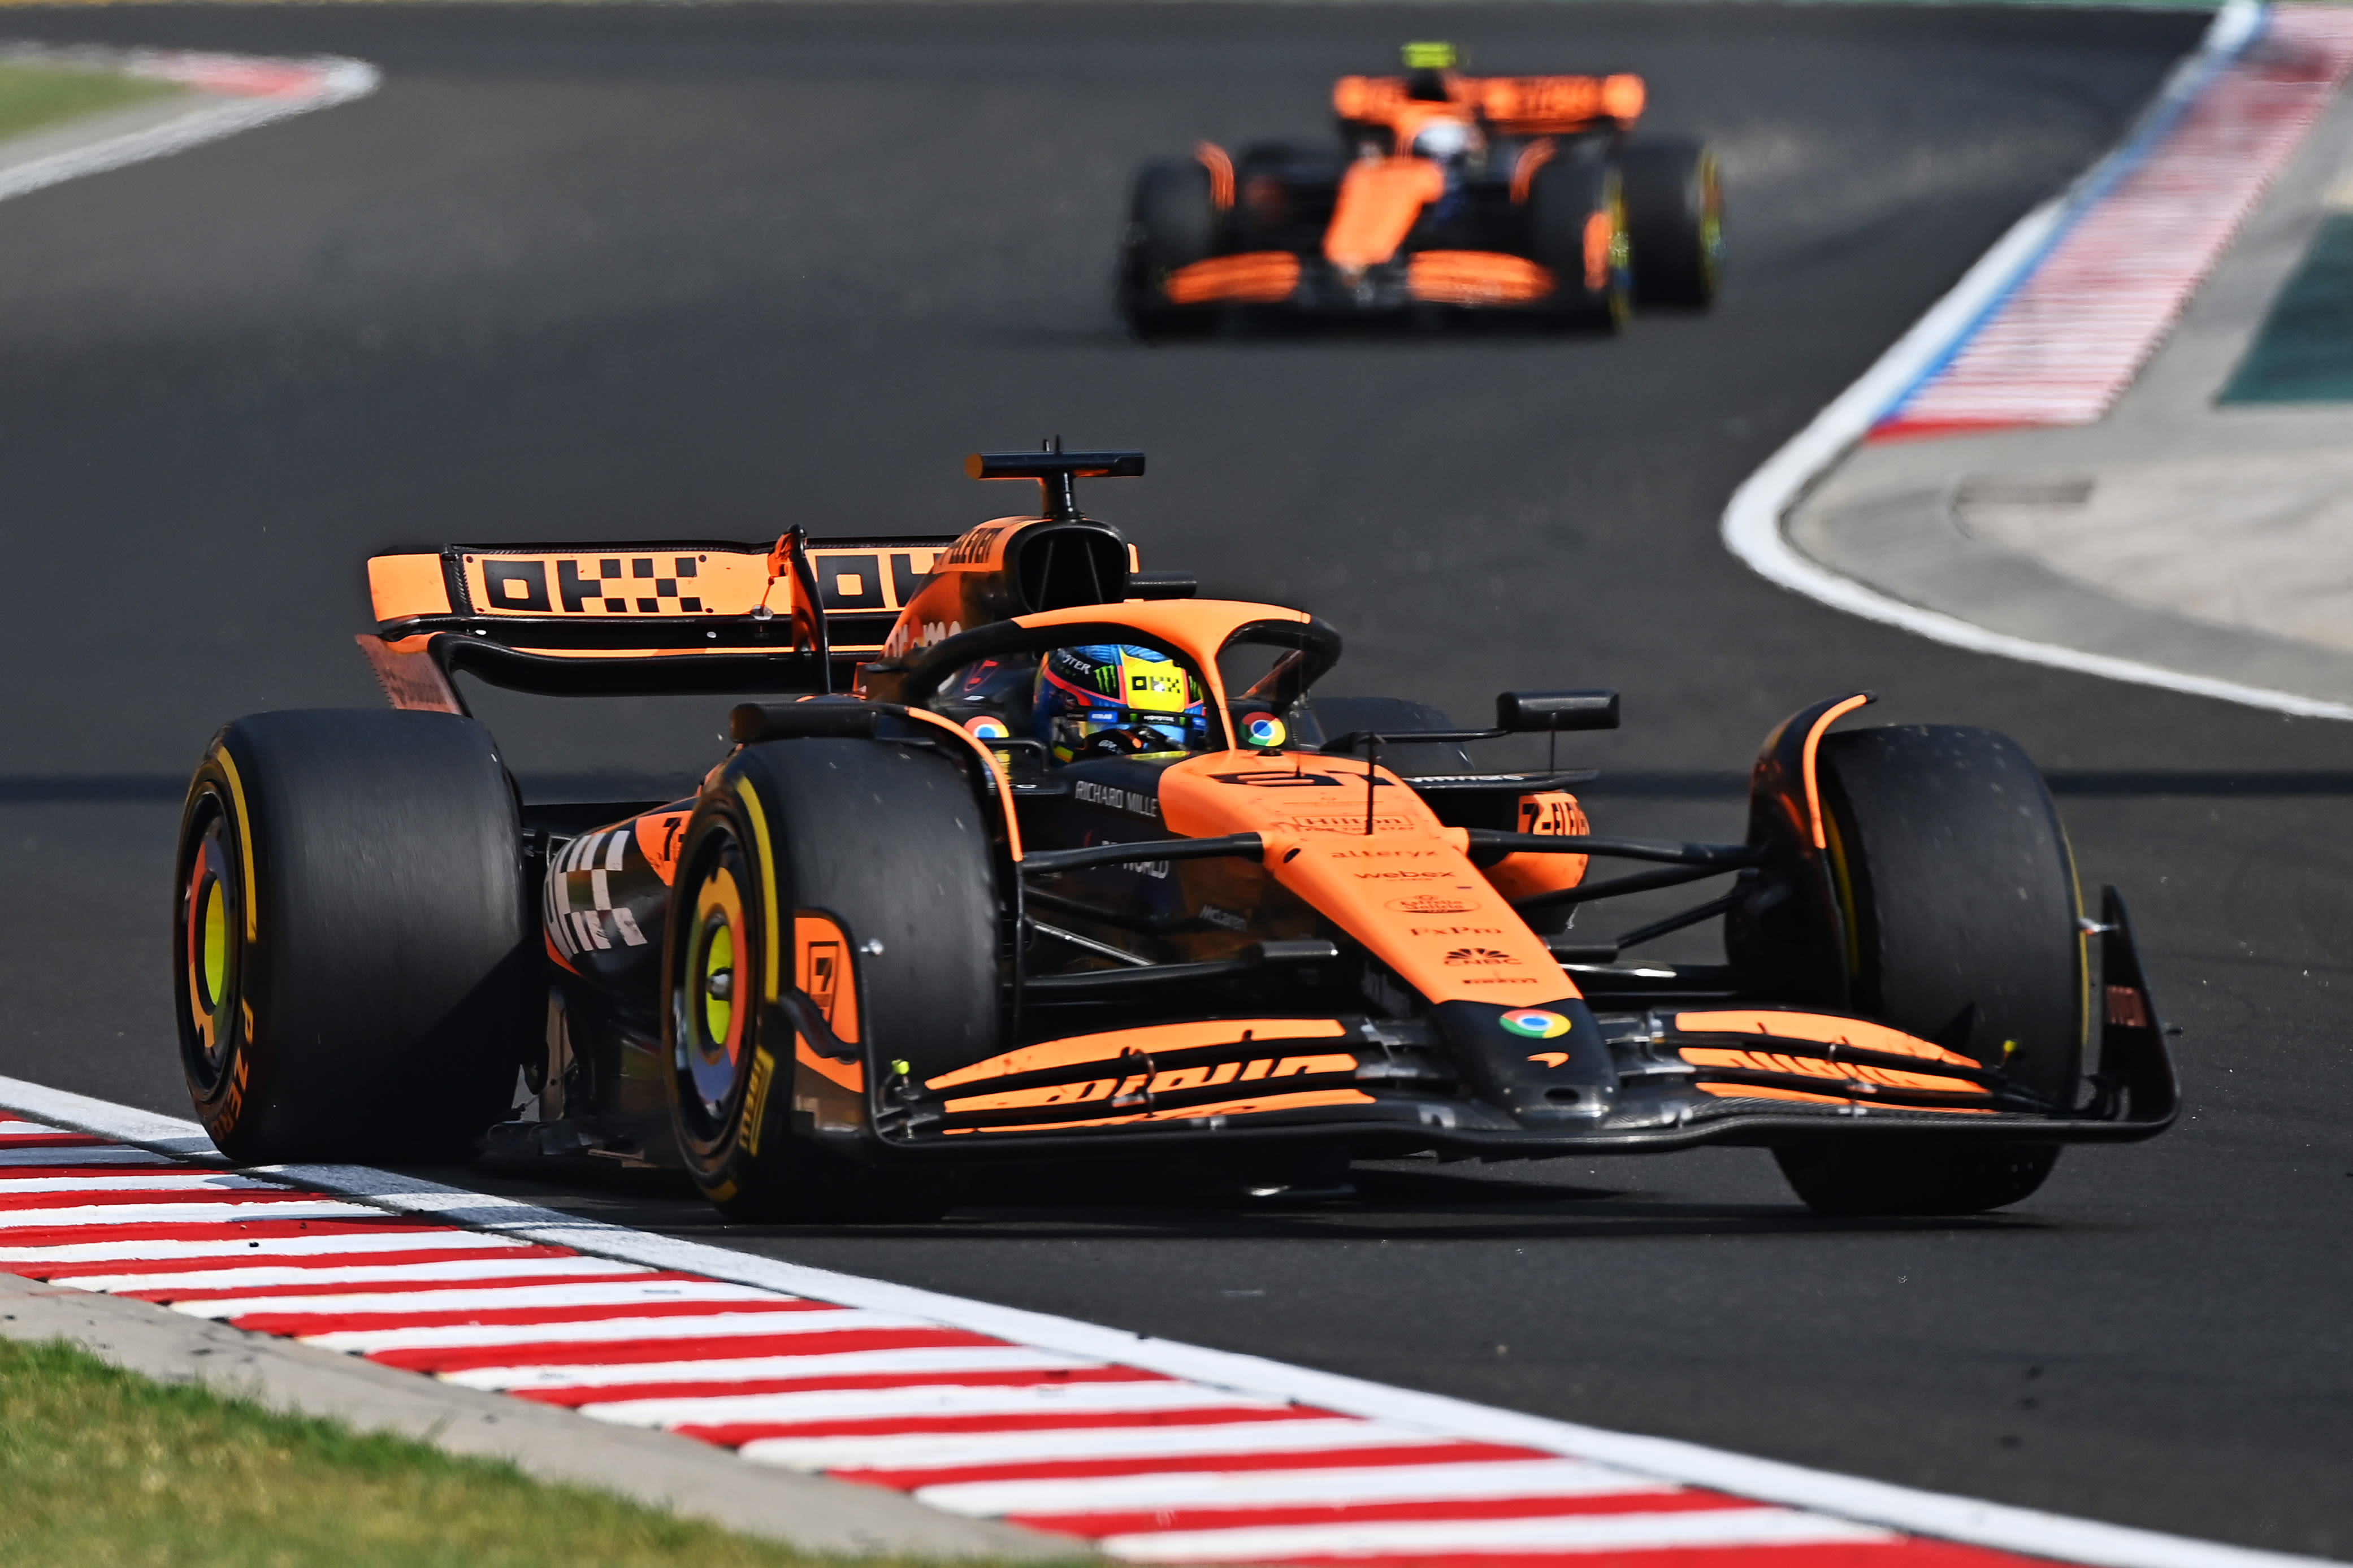 McLaren's team orders at the end of Hungarian Grand Prix tarnish team's first 1-2 finish since 2021